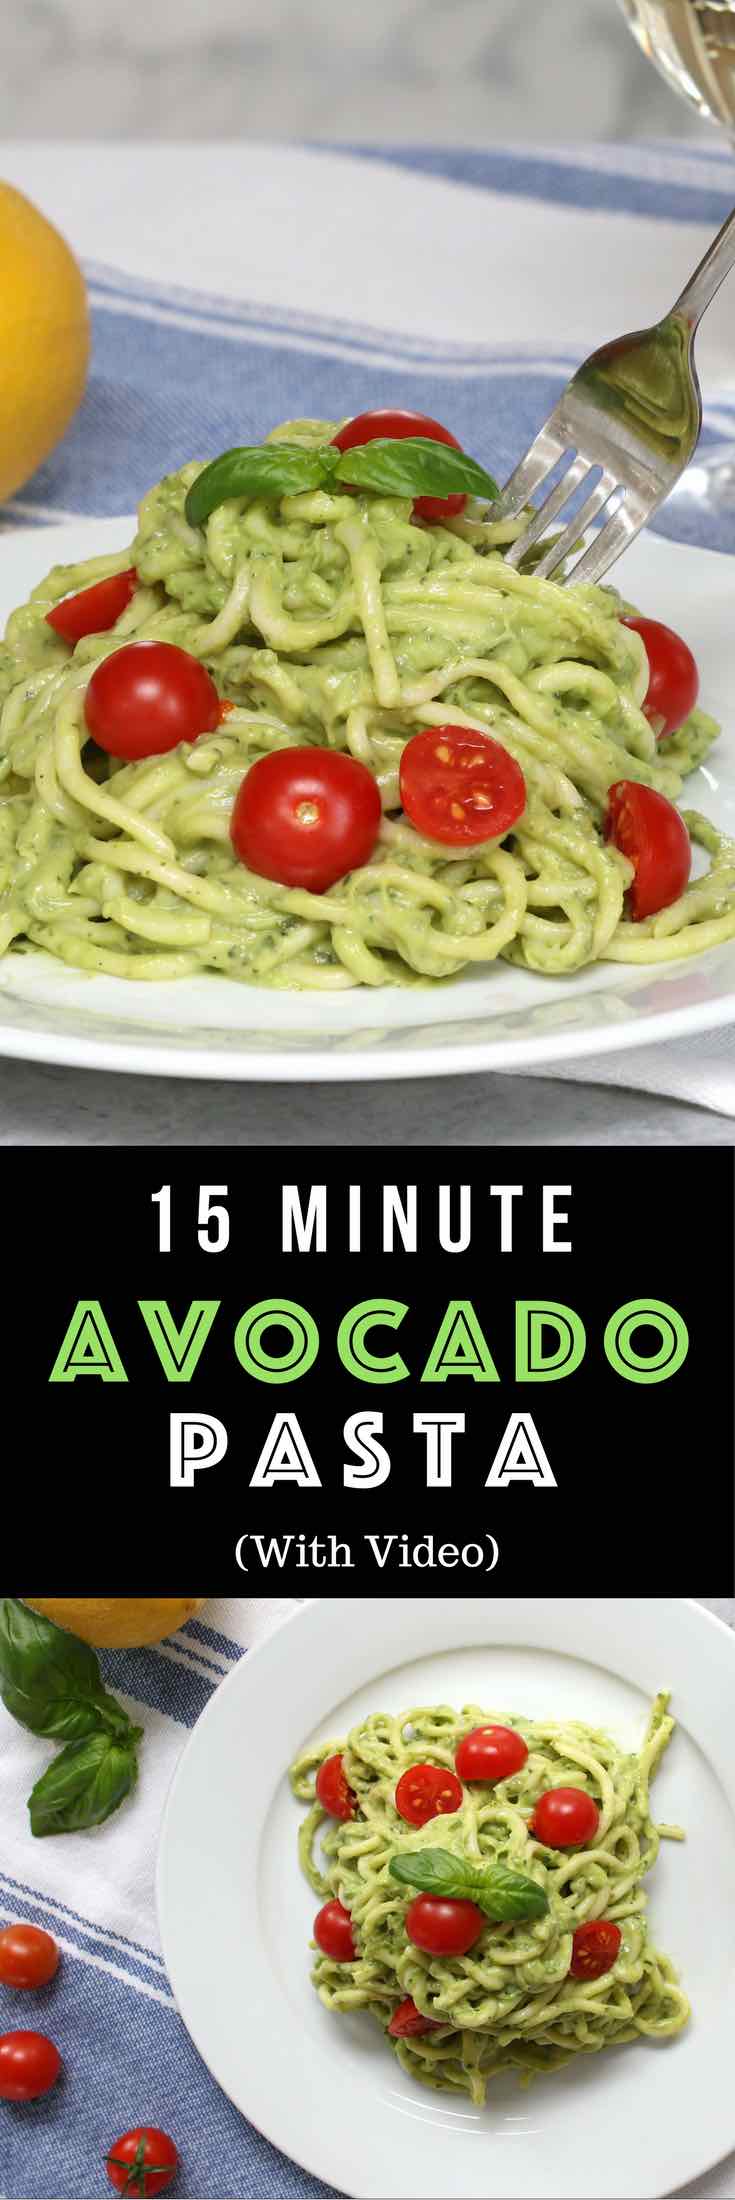 Easy, healthy, and on the table in about 15 minutes! Creamy Avocado Pasta is the easiest and best avocado sauce pasta. All you need is a few simple ingredients: spaghetti, ripe avocados peeled and halved, fresh basil leaves, lemon, salt and pepper, olive oil and cherry tomatoes. Quick and easy lunch or dinner recipe. Eat without guilt. Vegetarian. Video recipe. | Tipbuzz.com